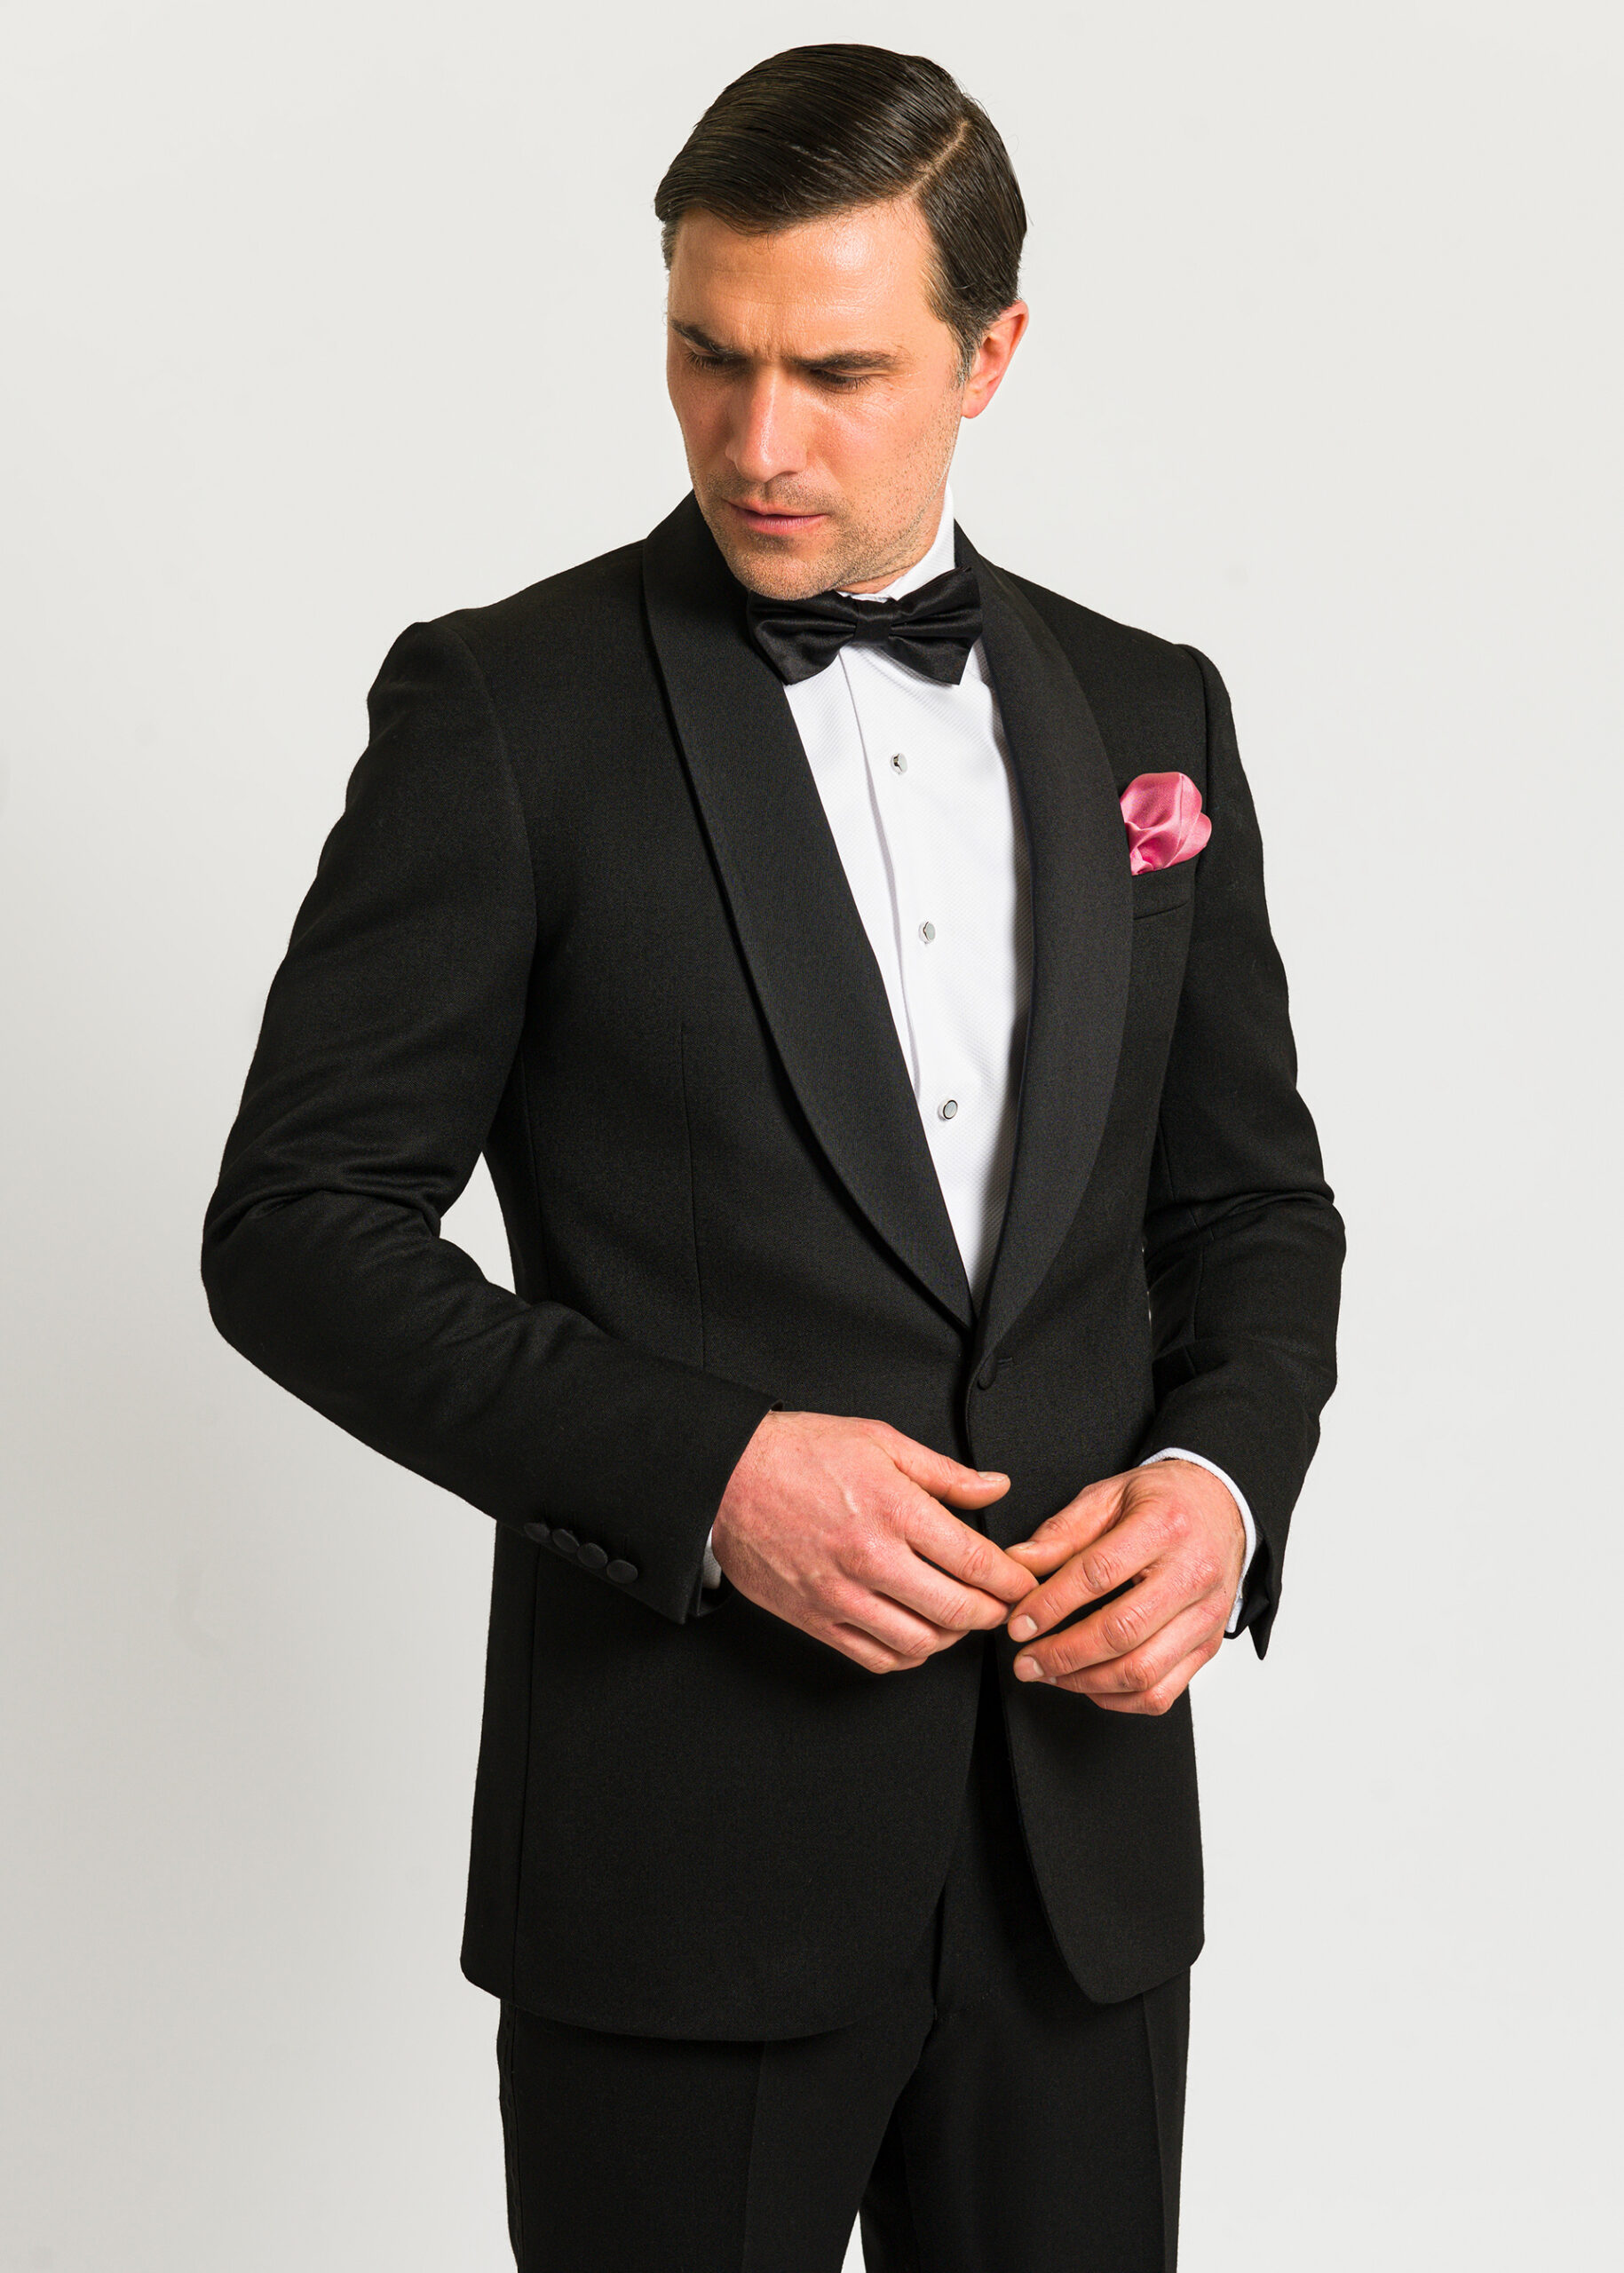 Shawl-Lapel-mens-dinner-suit-jacket-styled-with-pink-pocket-square